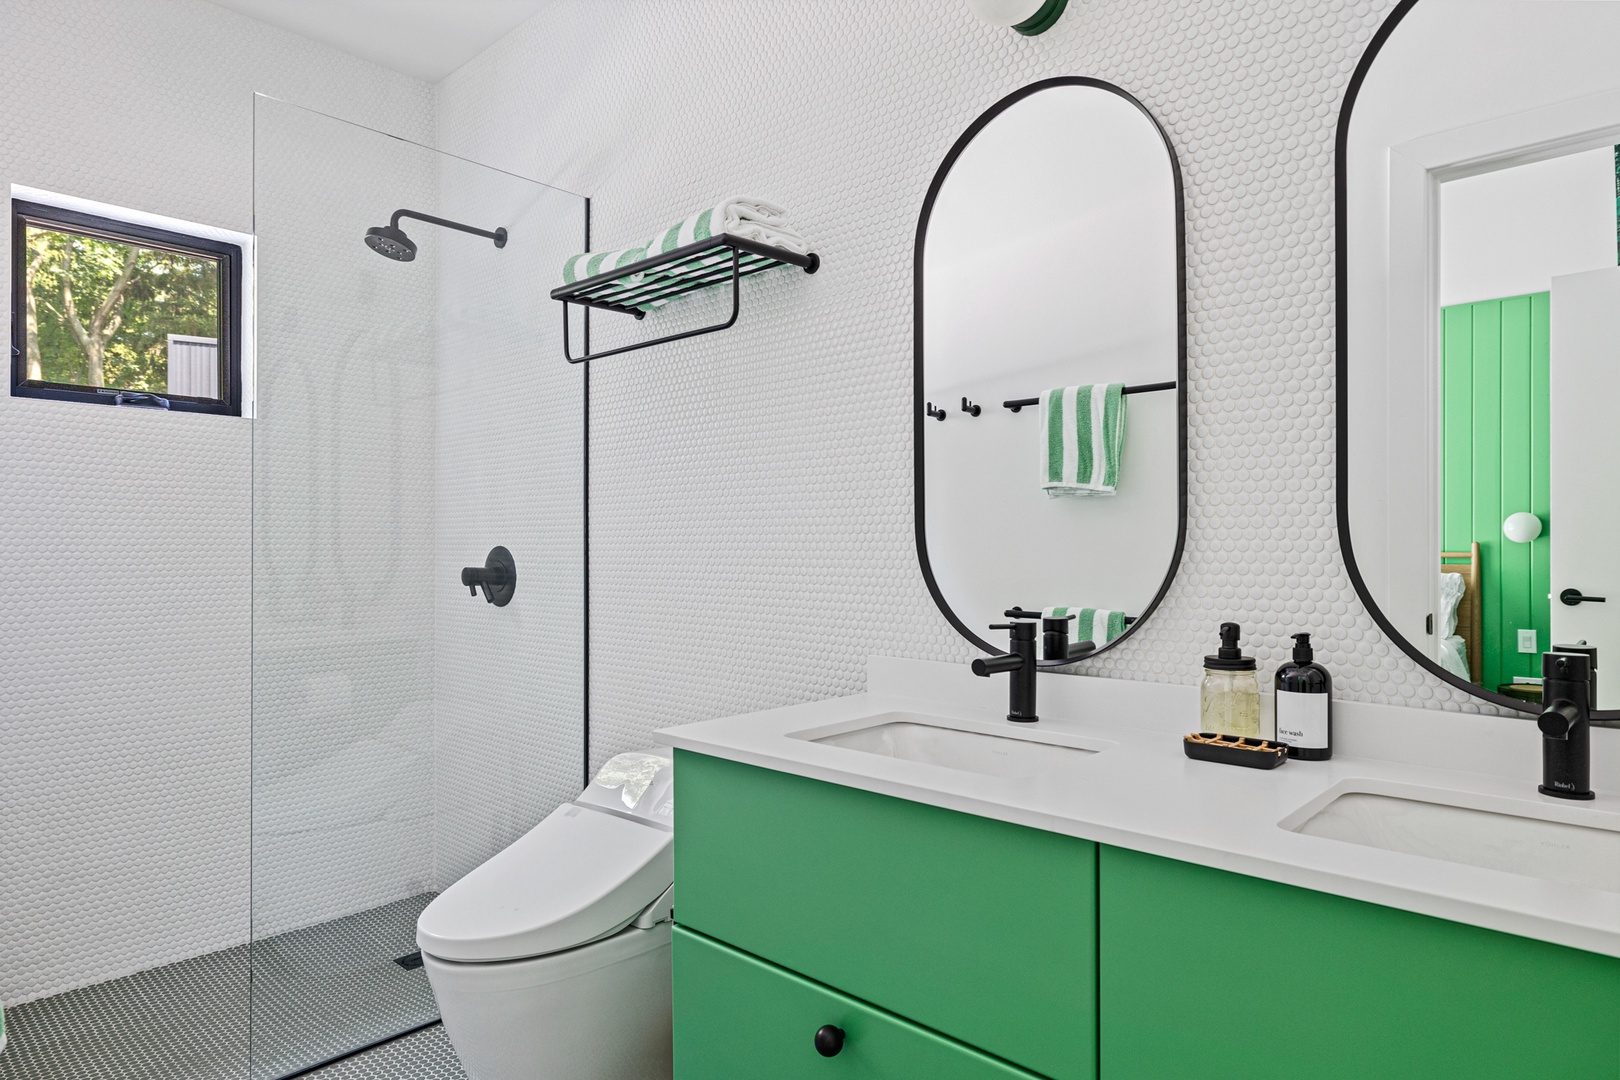 All bathrooms are fresh & bright with modern upgrades, fixtures, and design .